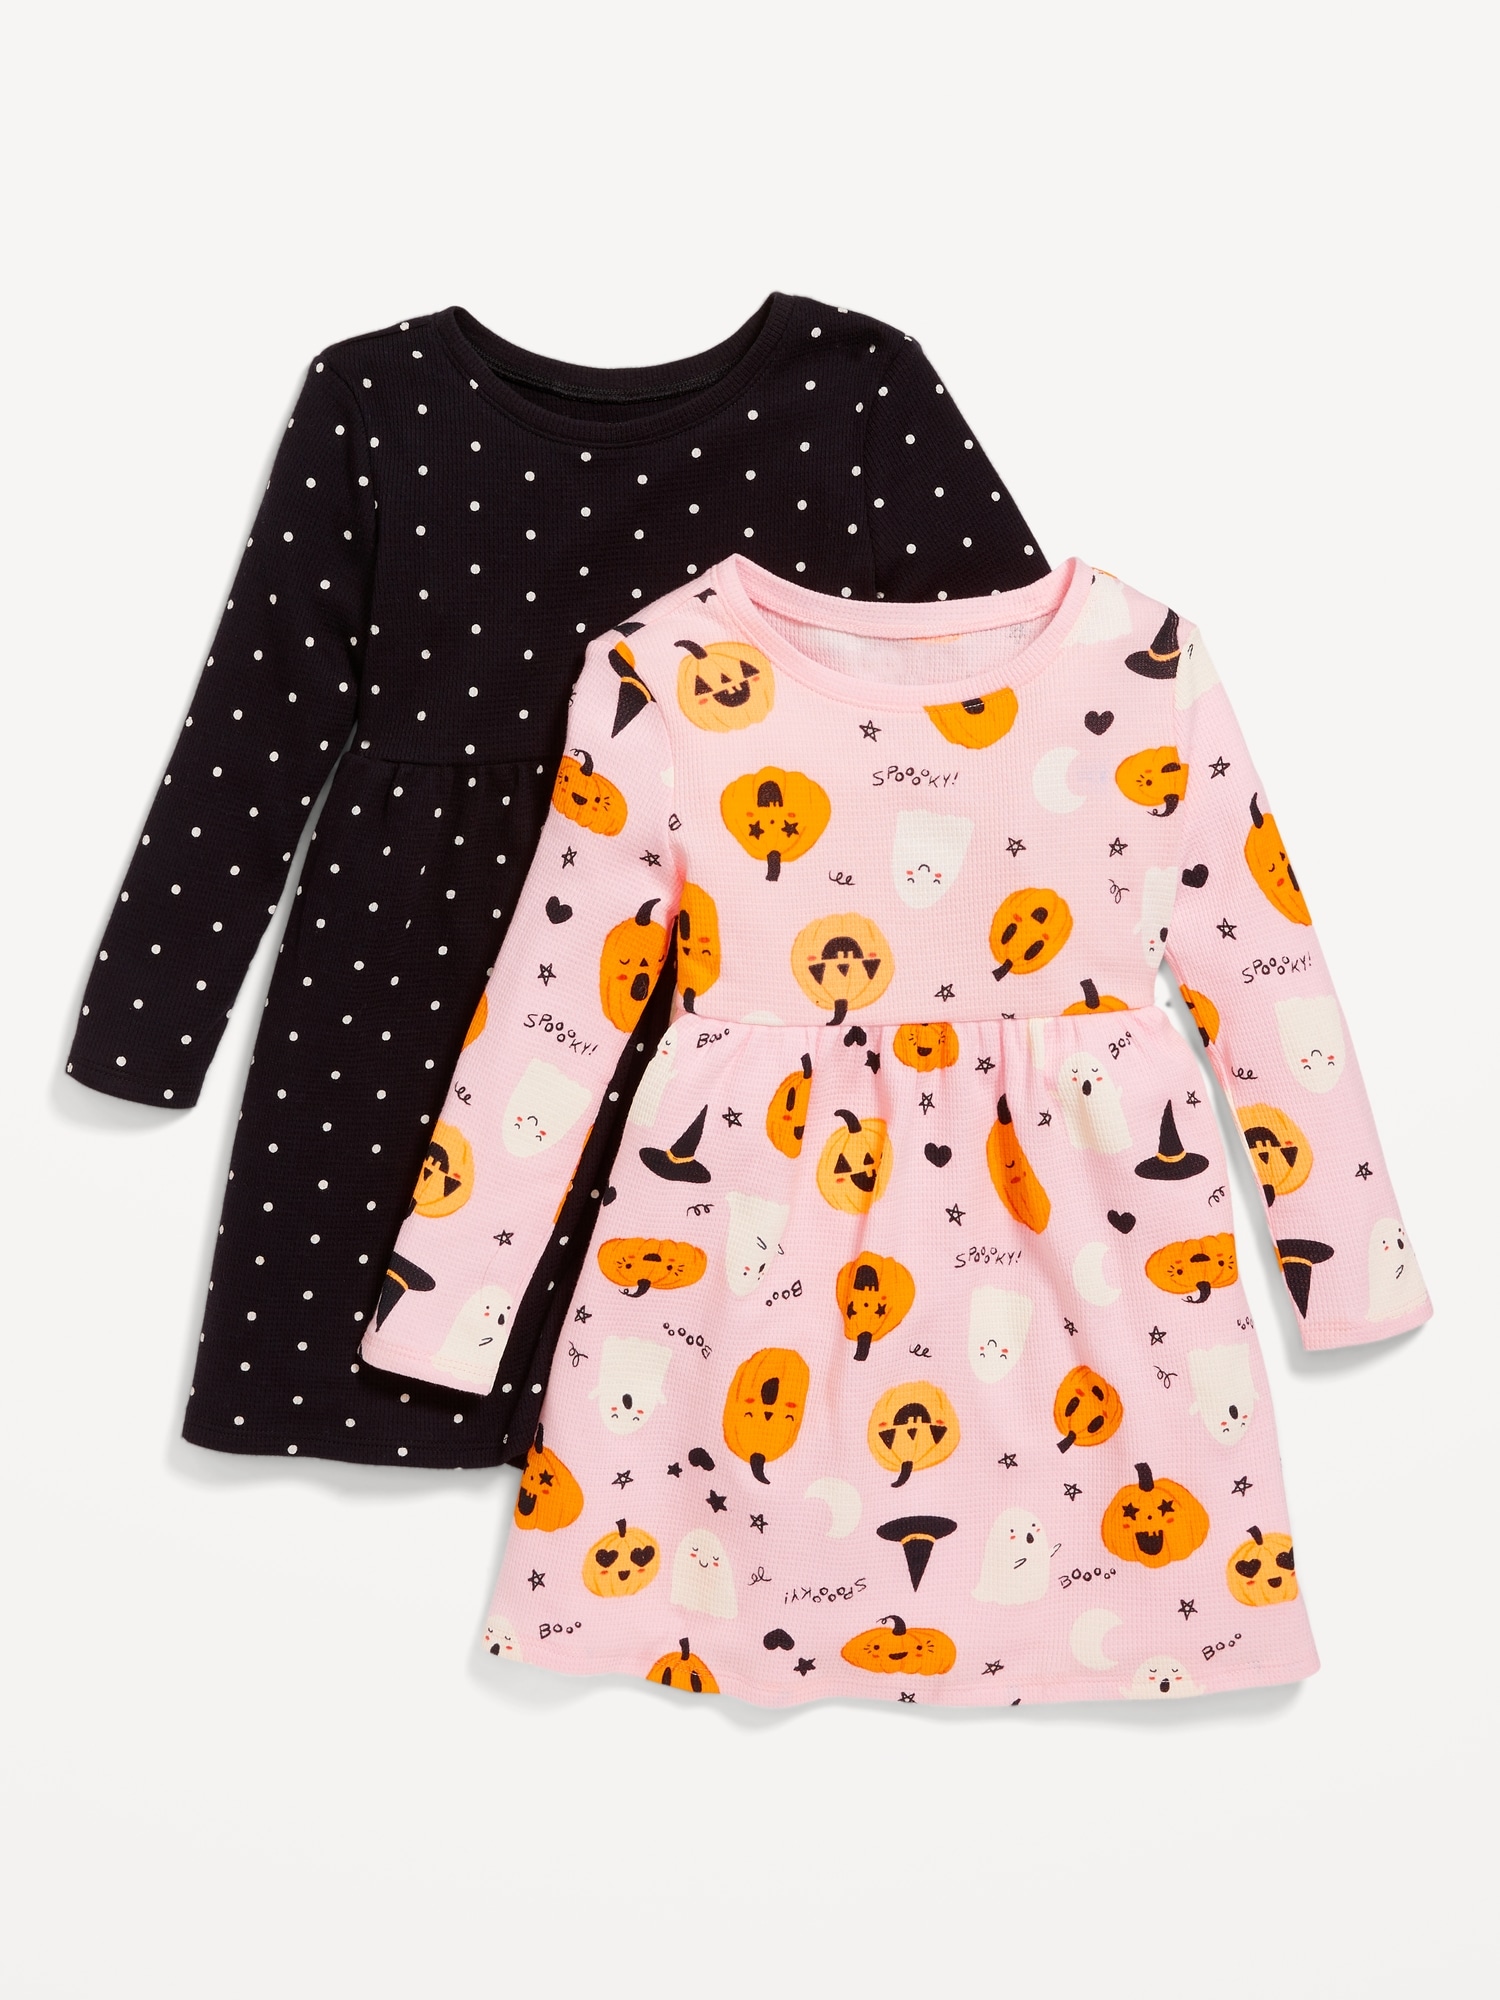 Fit & Flare Jersey Dress and Leggings Set for Girls